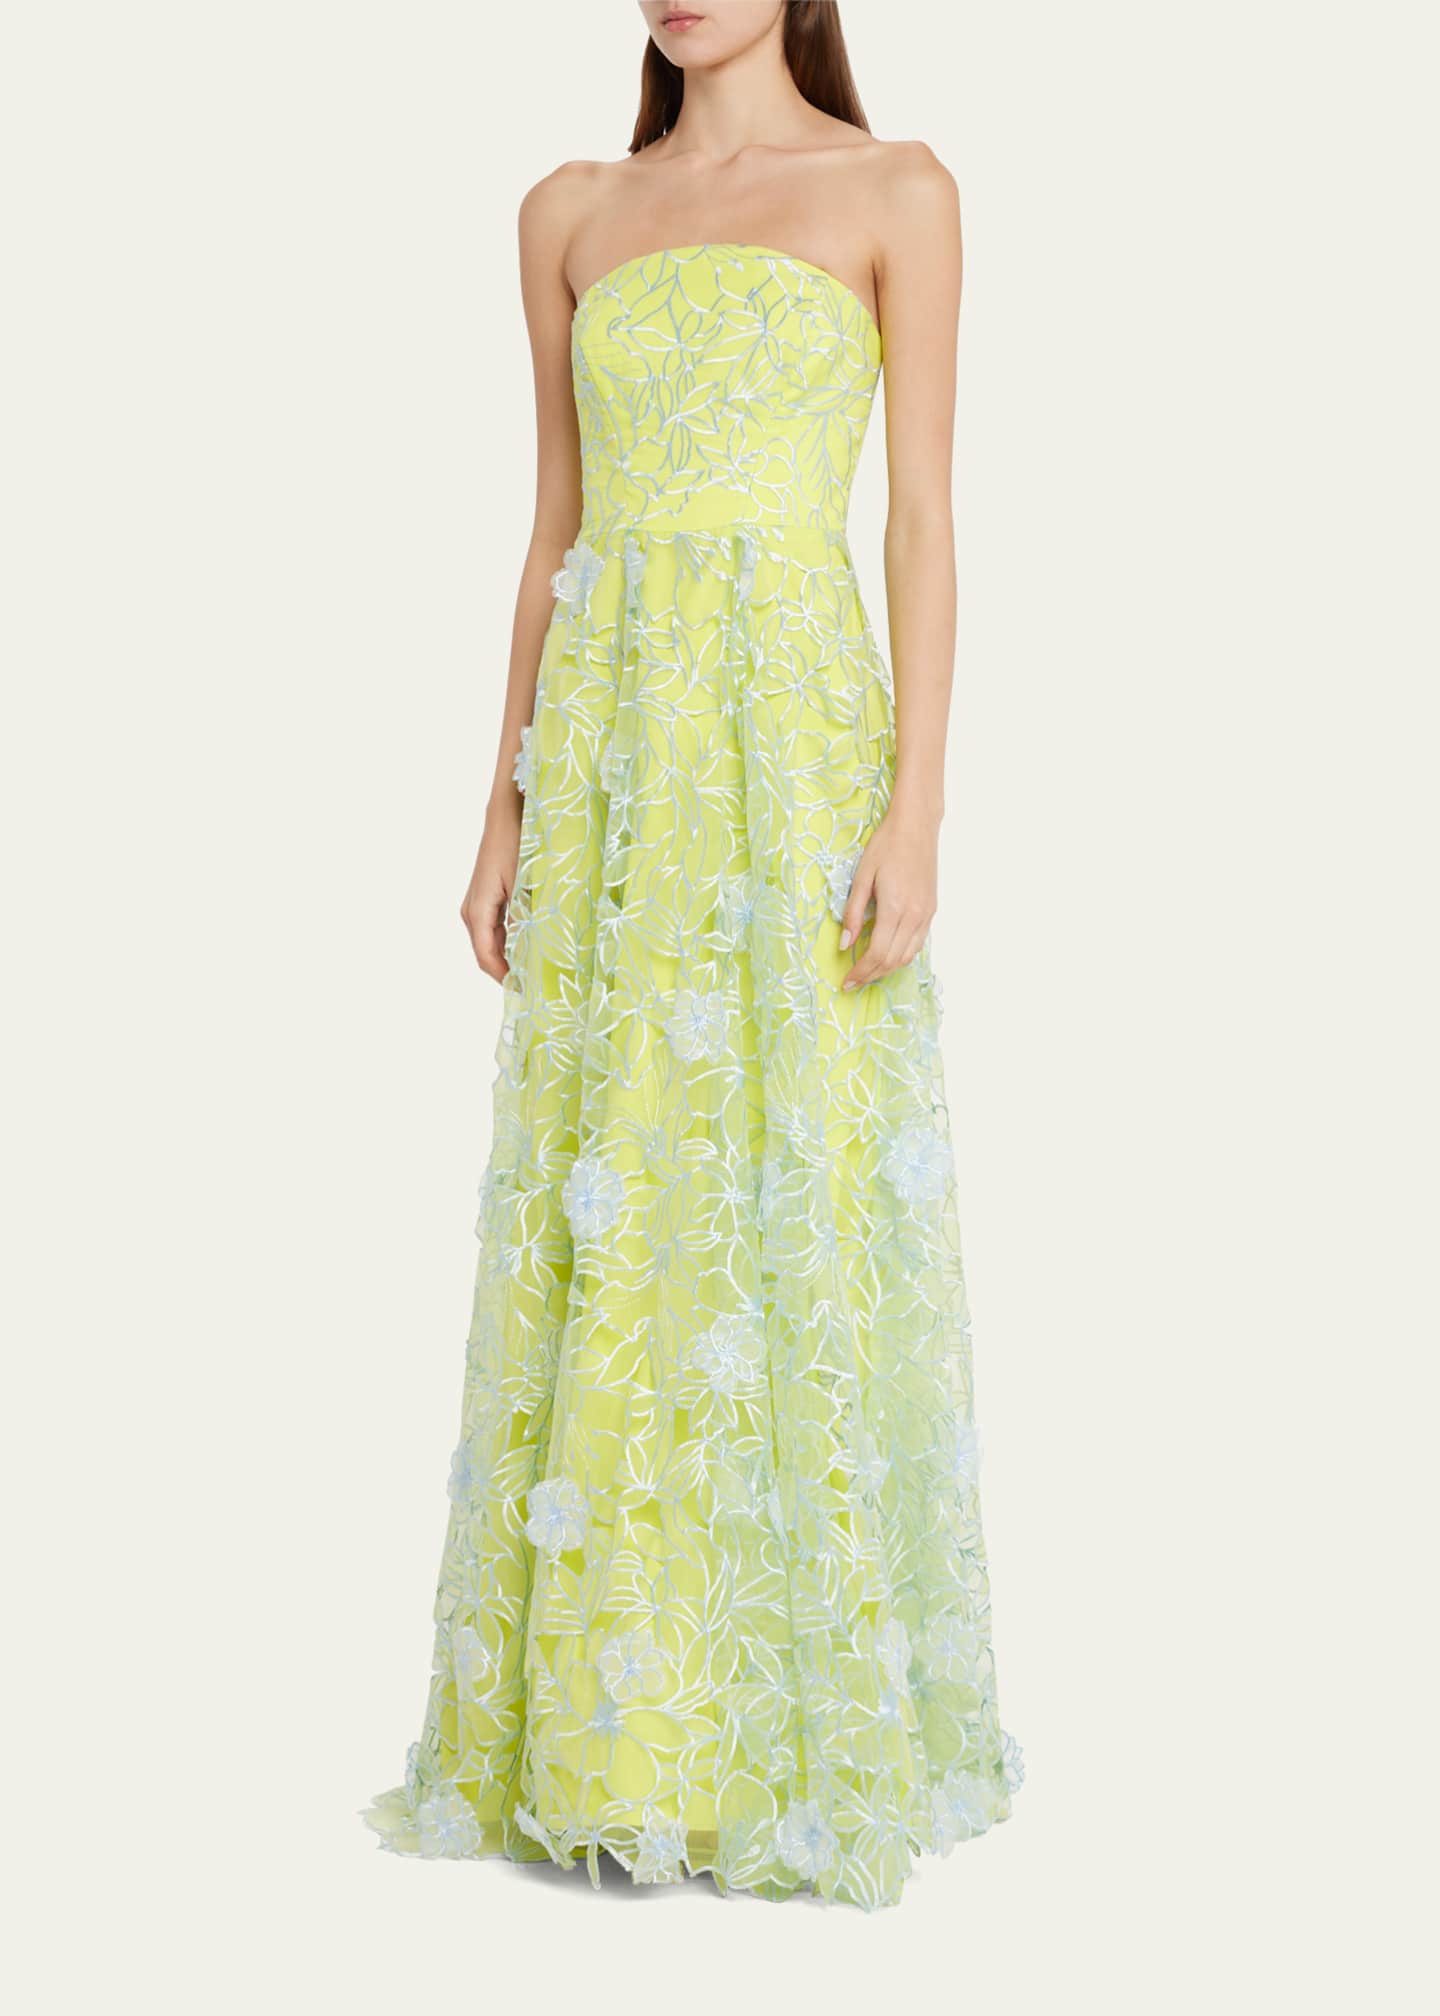 Marchesa Notte Strapless Cutout Floral-Embroidered Gown - Bergdorf Goodman